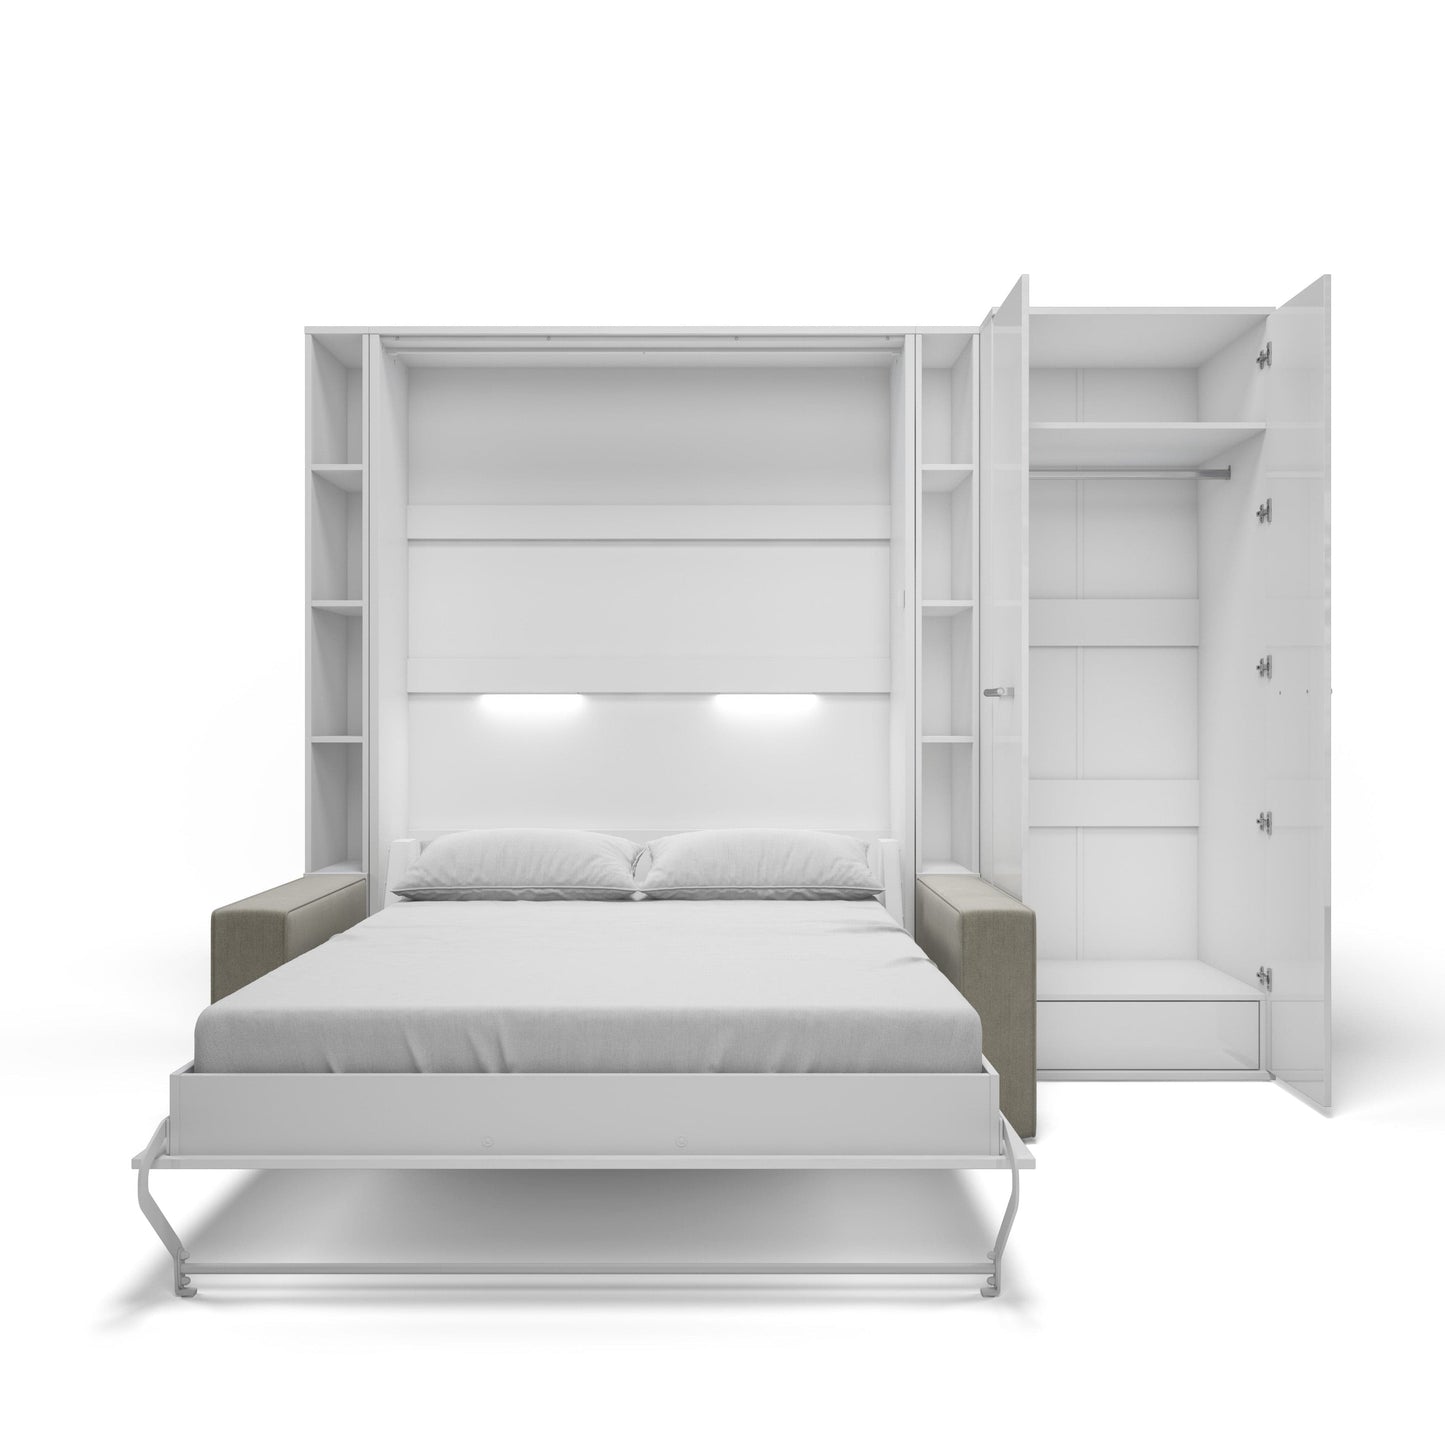 Maxima House Maxima House Vertical FULL size Murphy Bed Invento with a Sofa, two Cabinets and Wardrobe